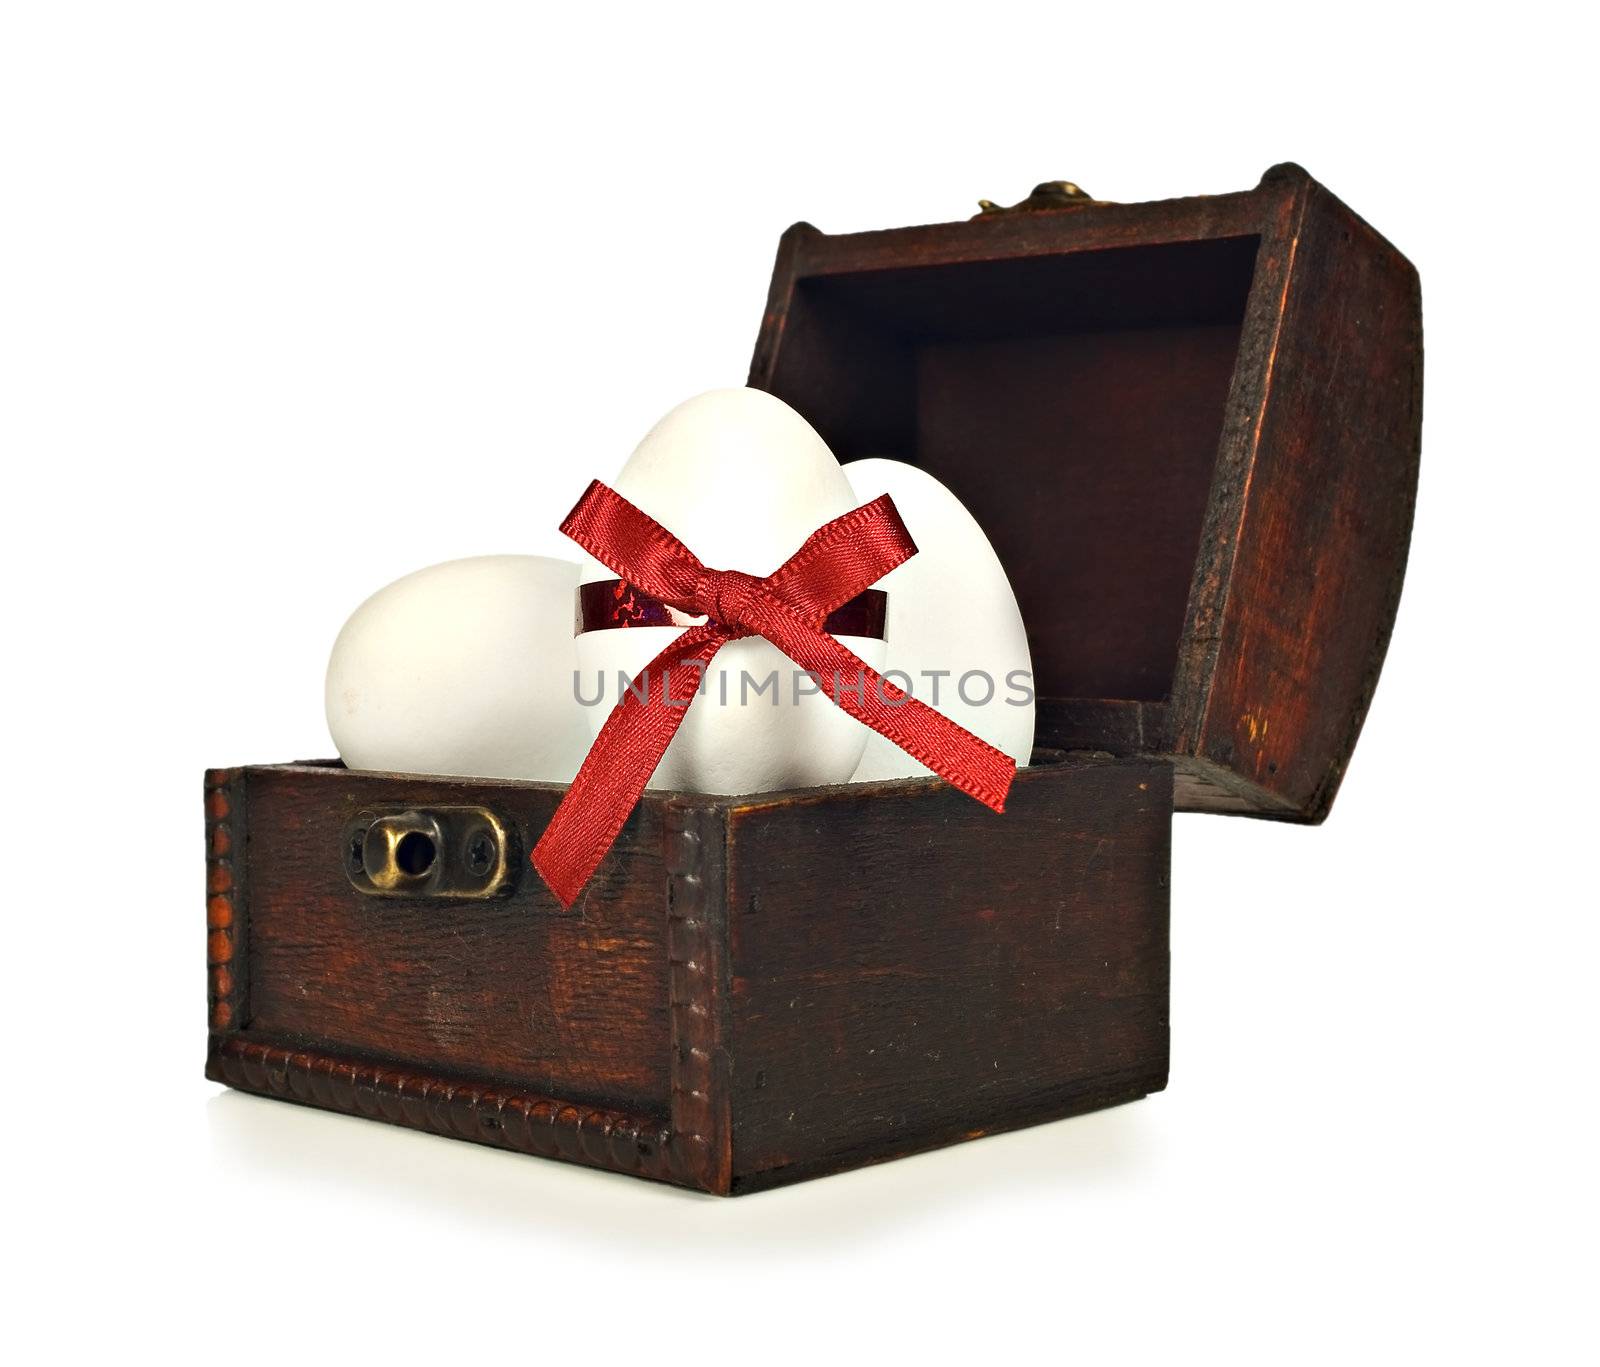 White candy easter eggs in a chest on a white background